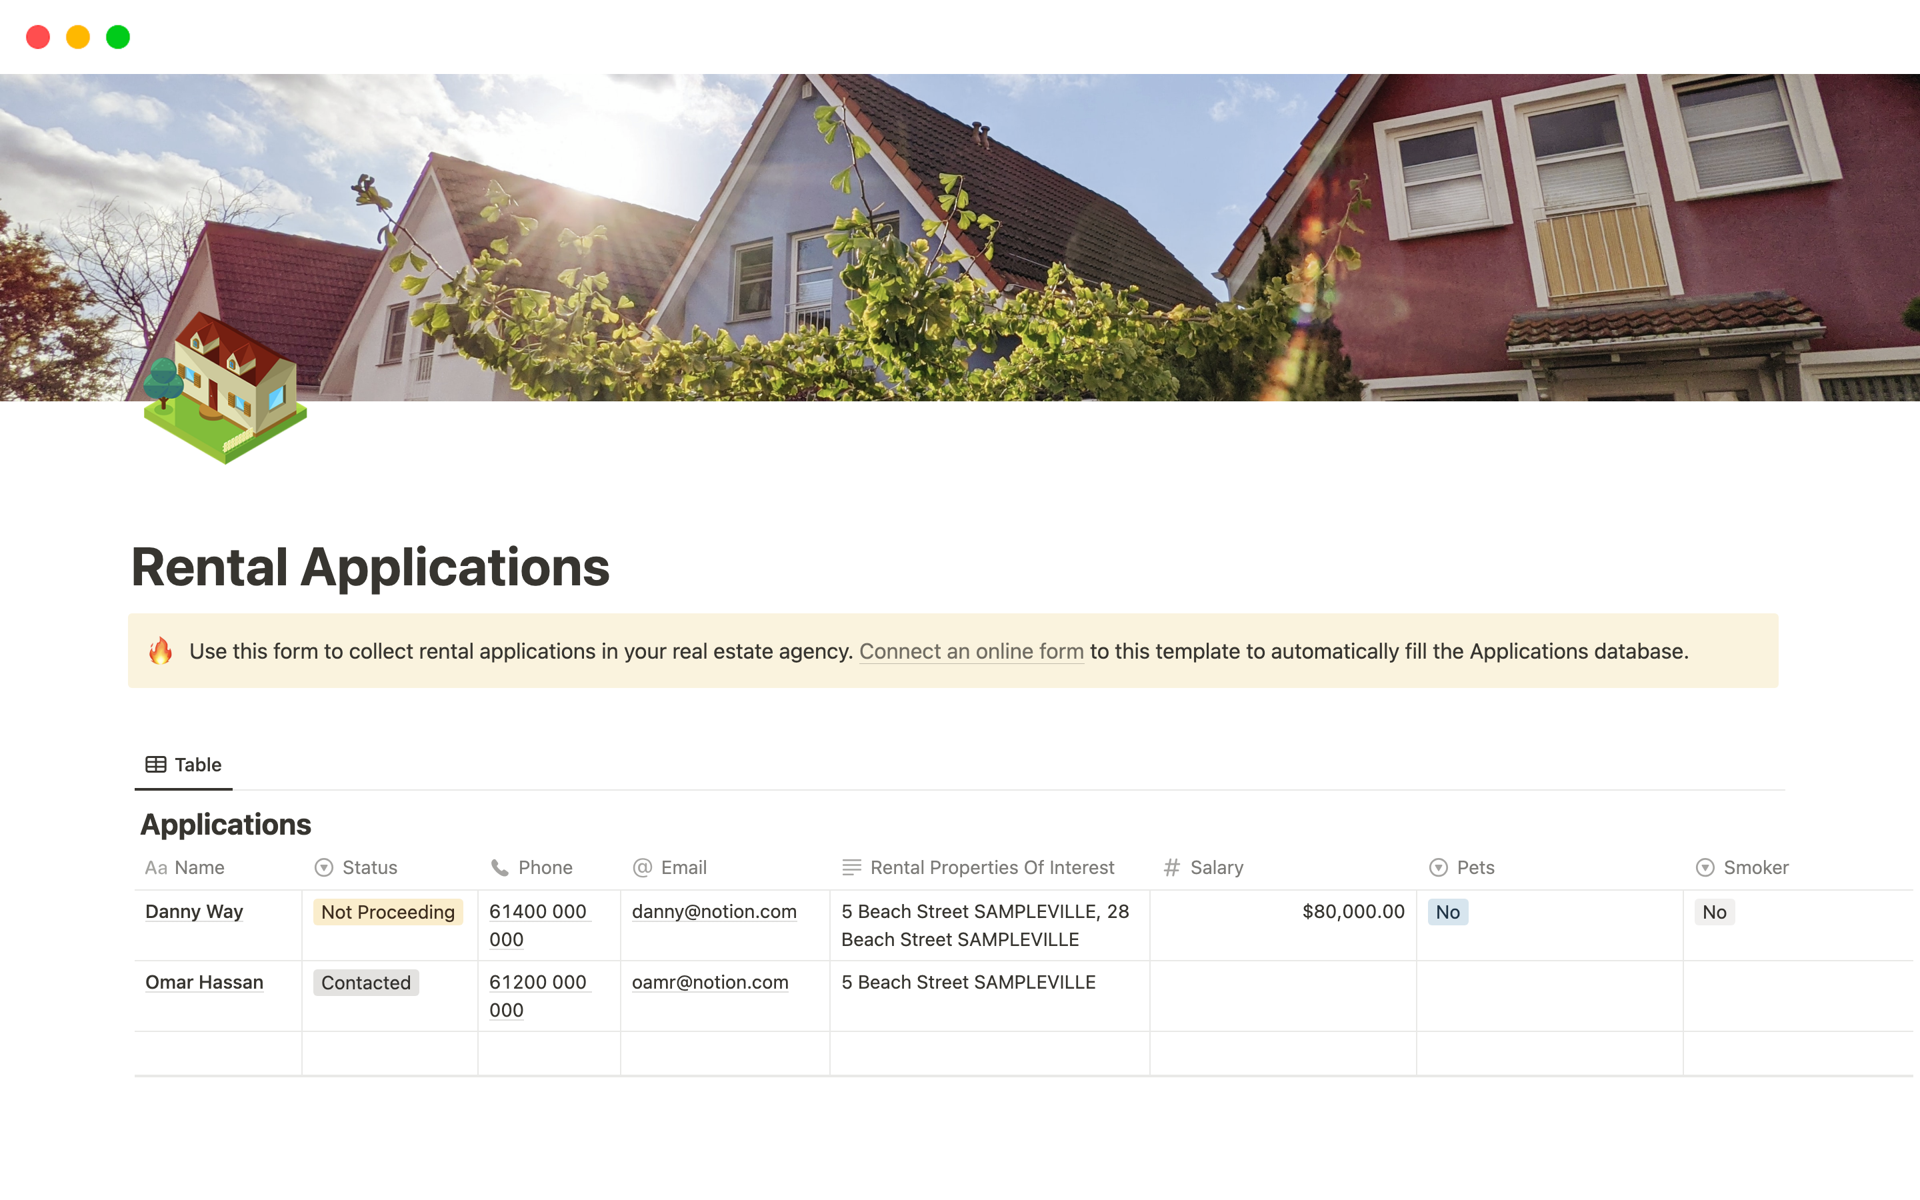 Use this Notion Rental Applications template, connected to an online form, to have real estate rental applications auto-updated in Notion.